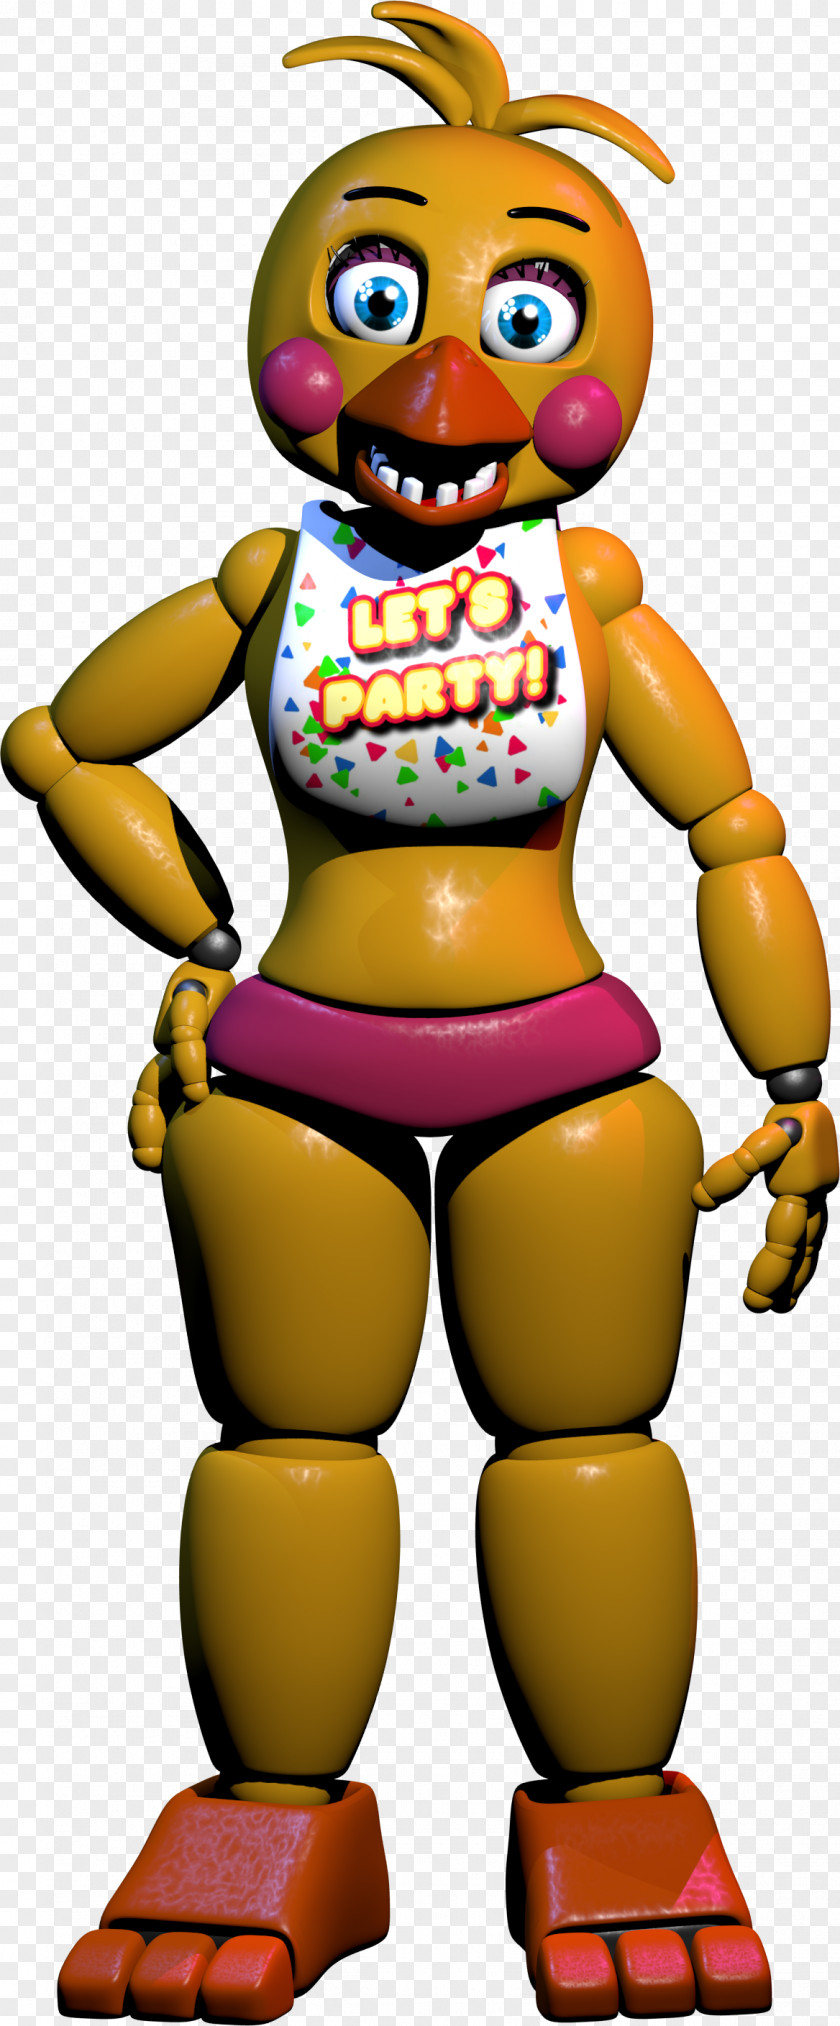 Toy Chica Five Nights At Freddy's 2 Blender FBX Cinema 4D PNG